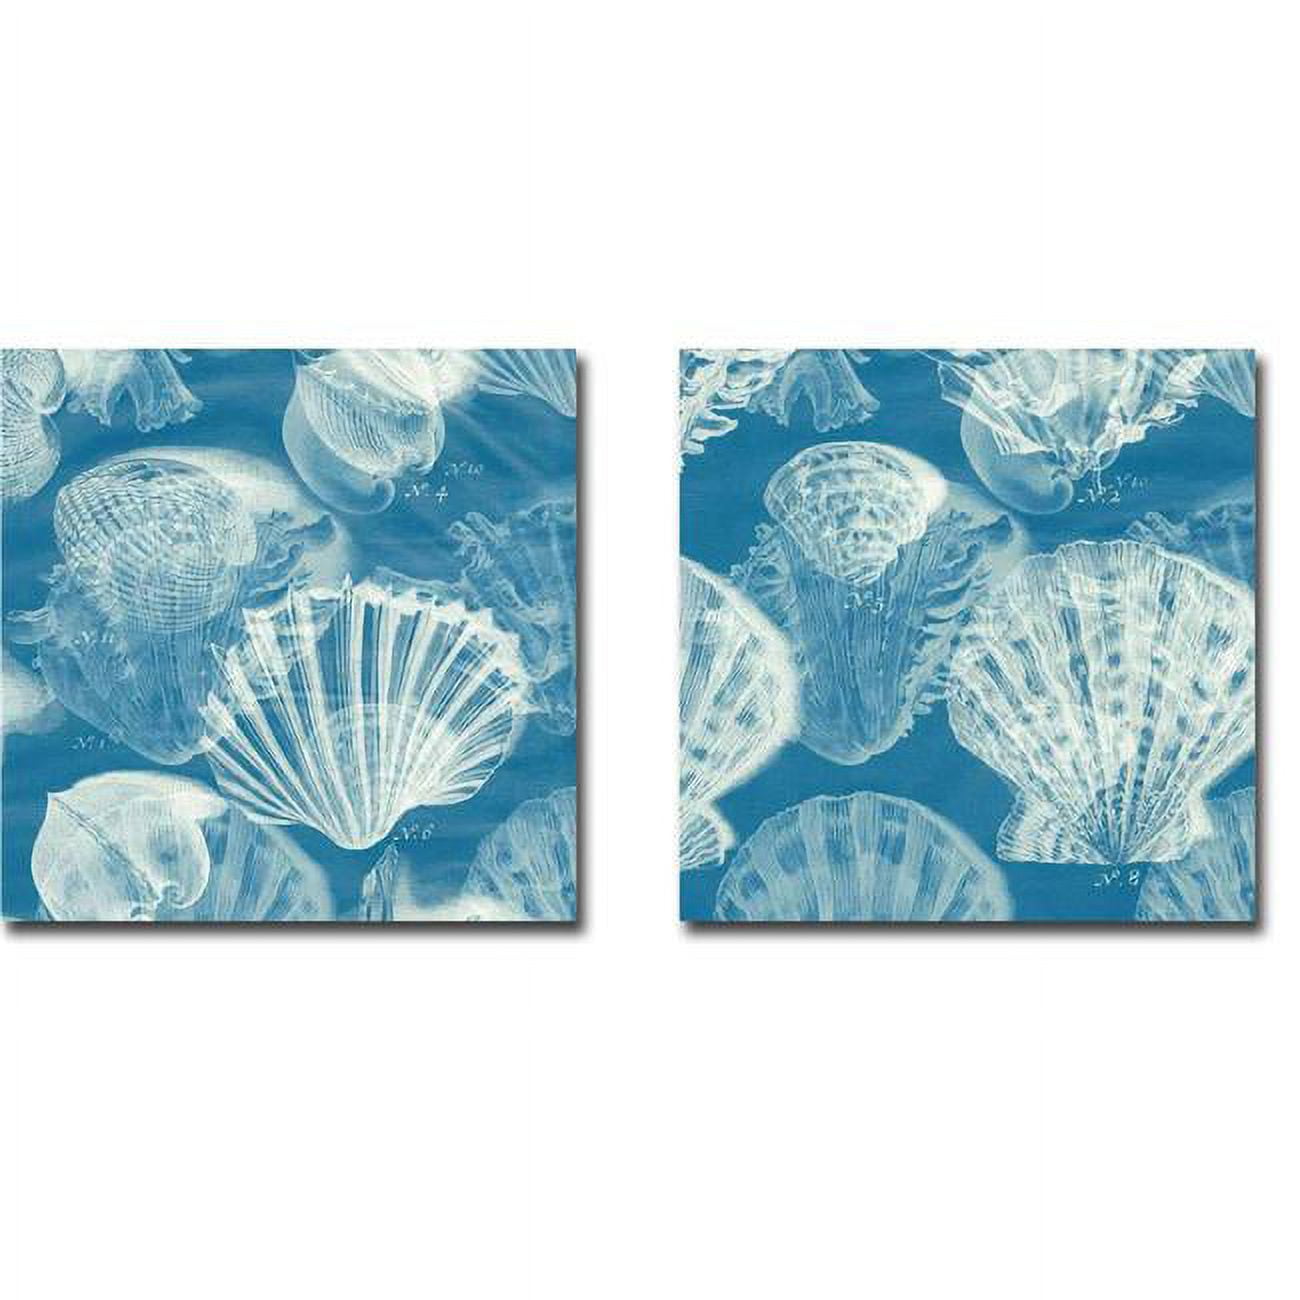 1212x743eg Shell Blueprint 1 & 2 By John Butler 2-piece Gallery-wrapped Canvas Giclee Set - 12 X 12 X 1.5 In.